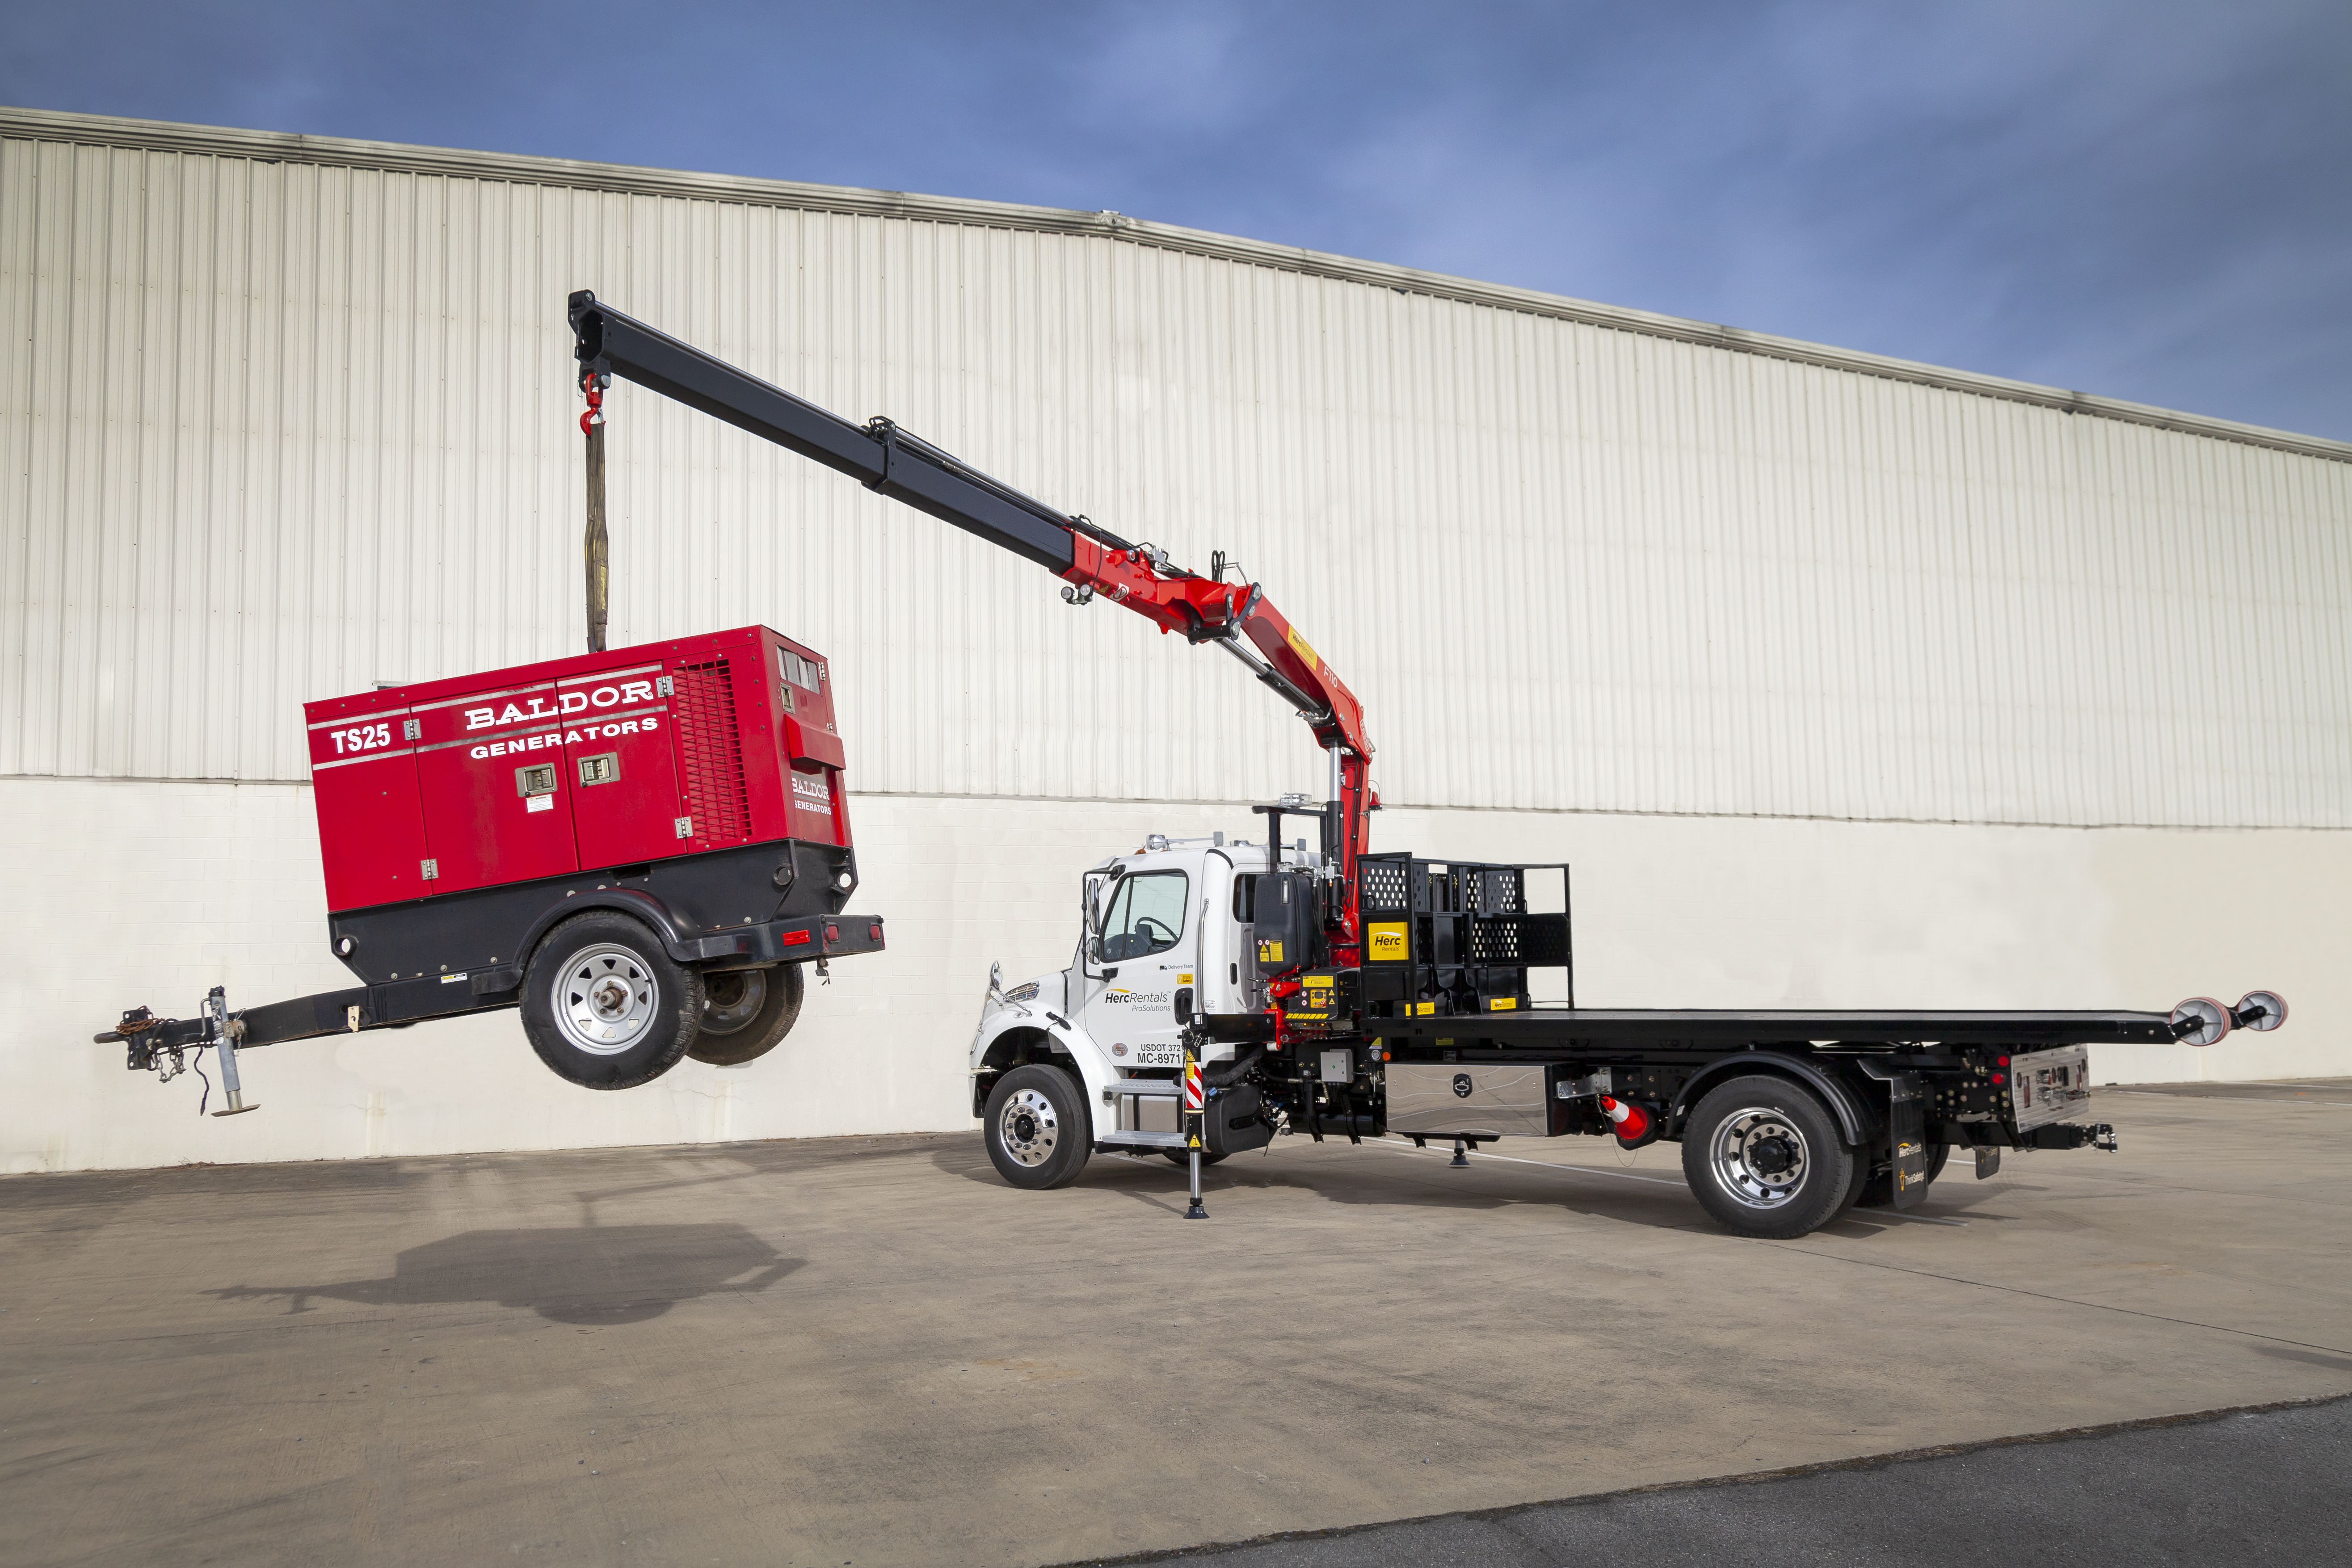 Titan® C-Series can be outfitted with a remote control hydraulic crane
, unit photo 4 of 33